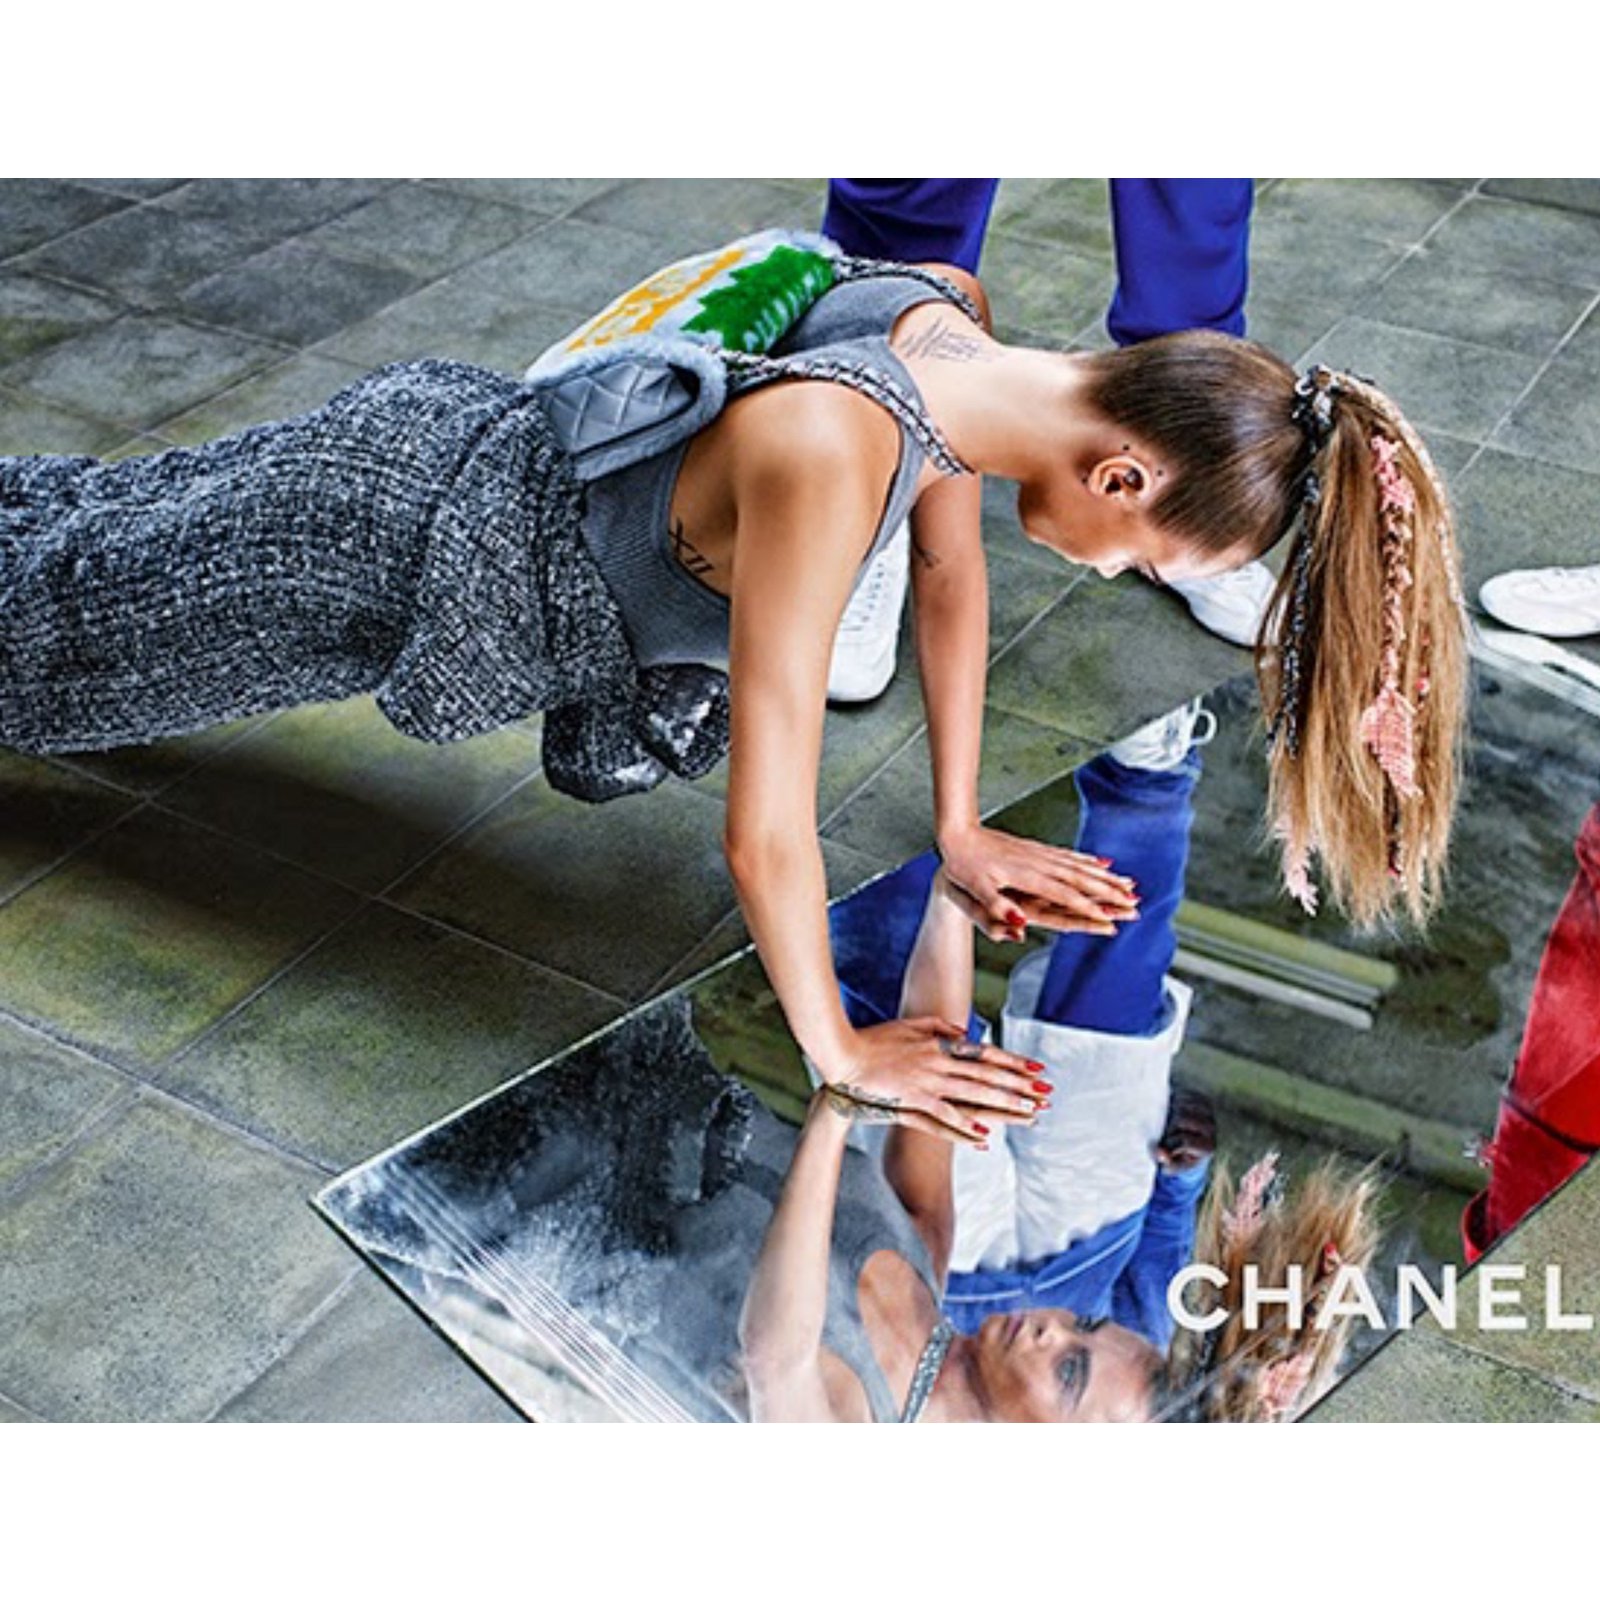 50 More Photos That Prove Chanel Bags Are The Reigning Celebrity